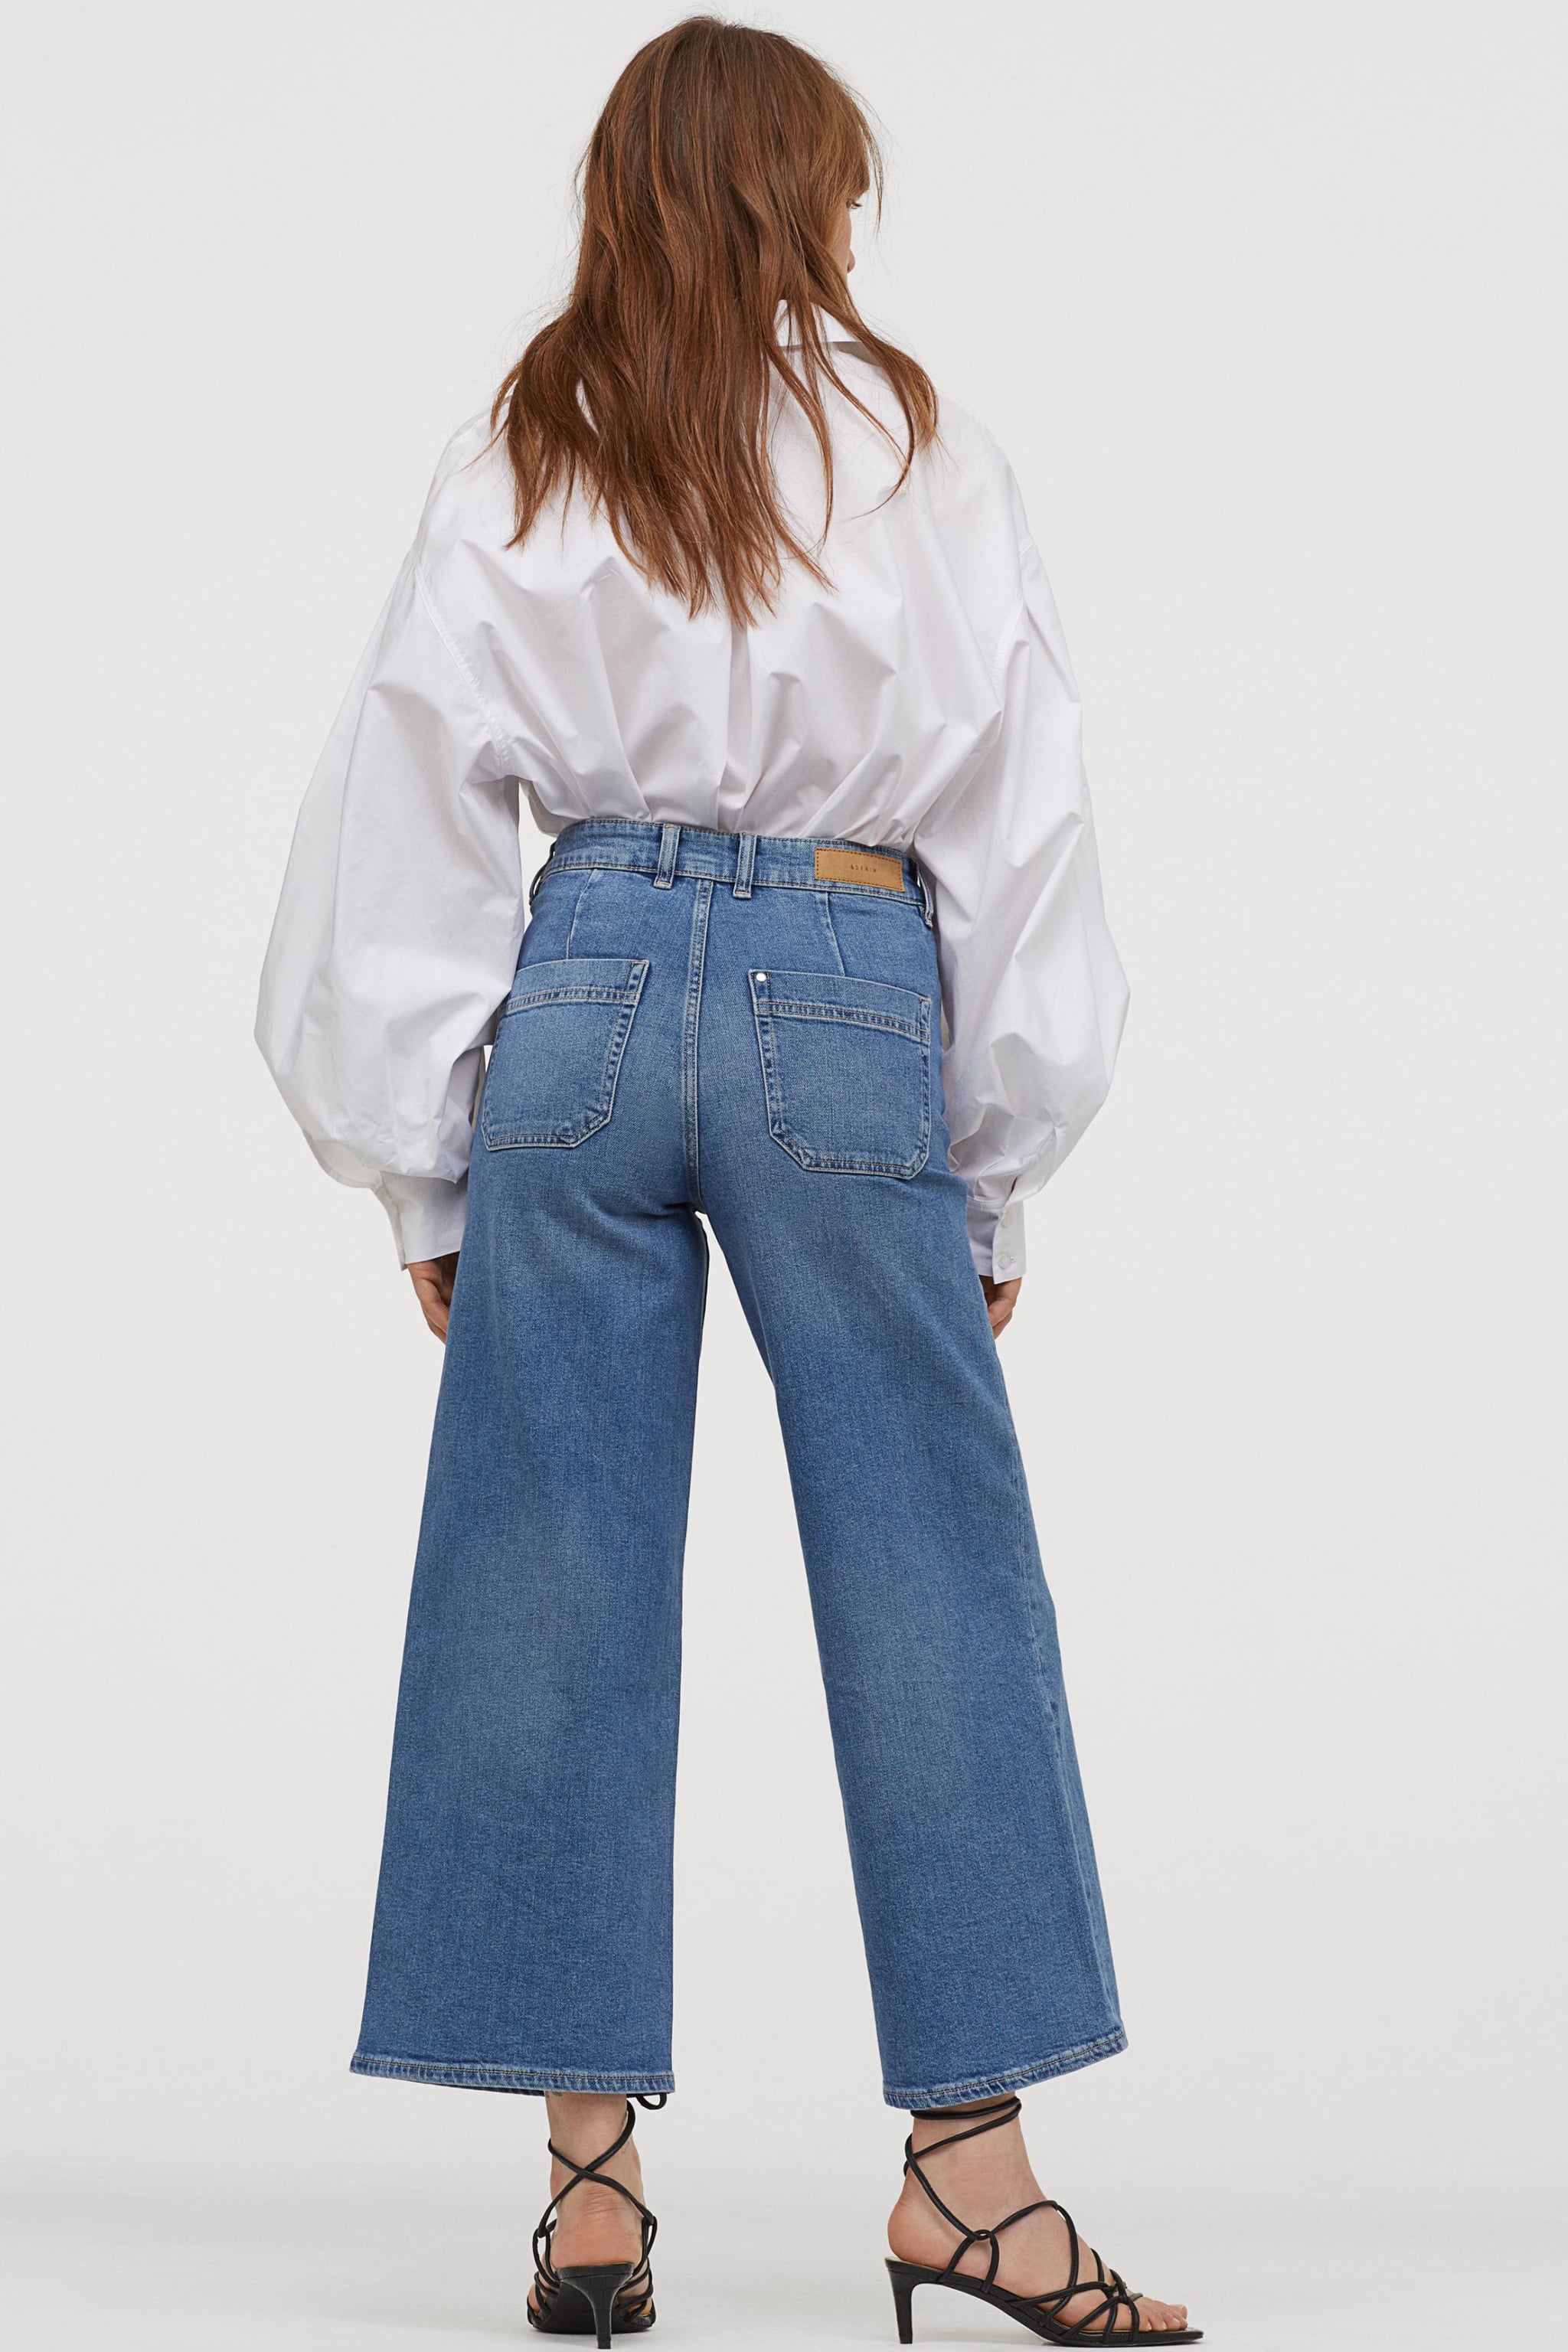 culotte high ankle jeans h&m